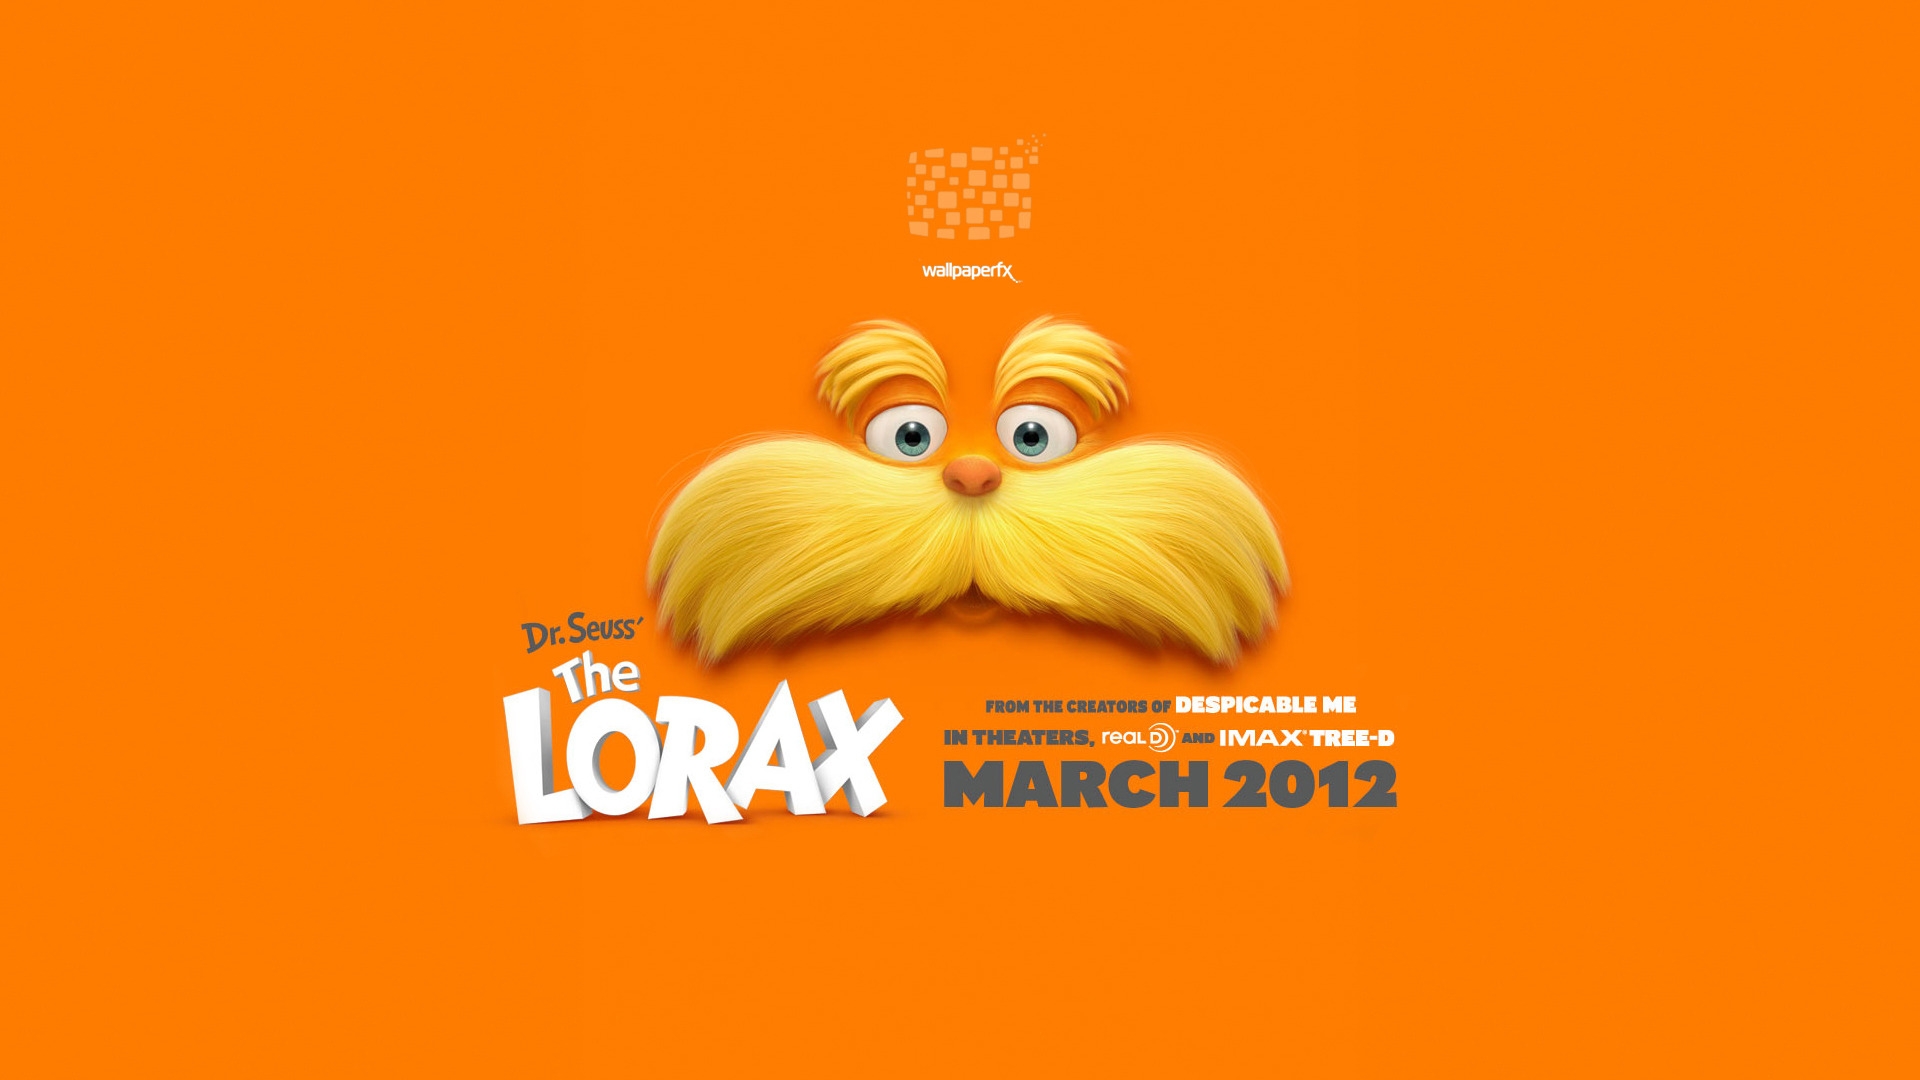 Dr Seuss The Lorax Movie 2012 for 1920 x 1080 HDTV 1080p resolution